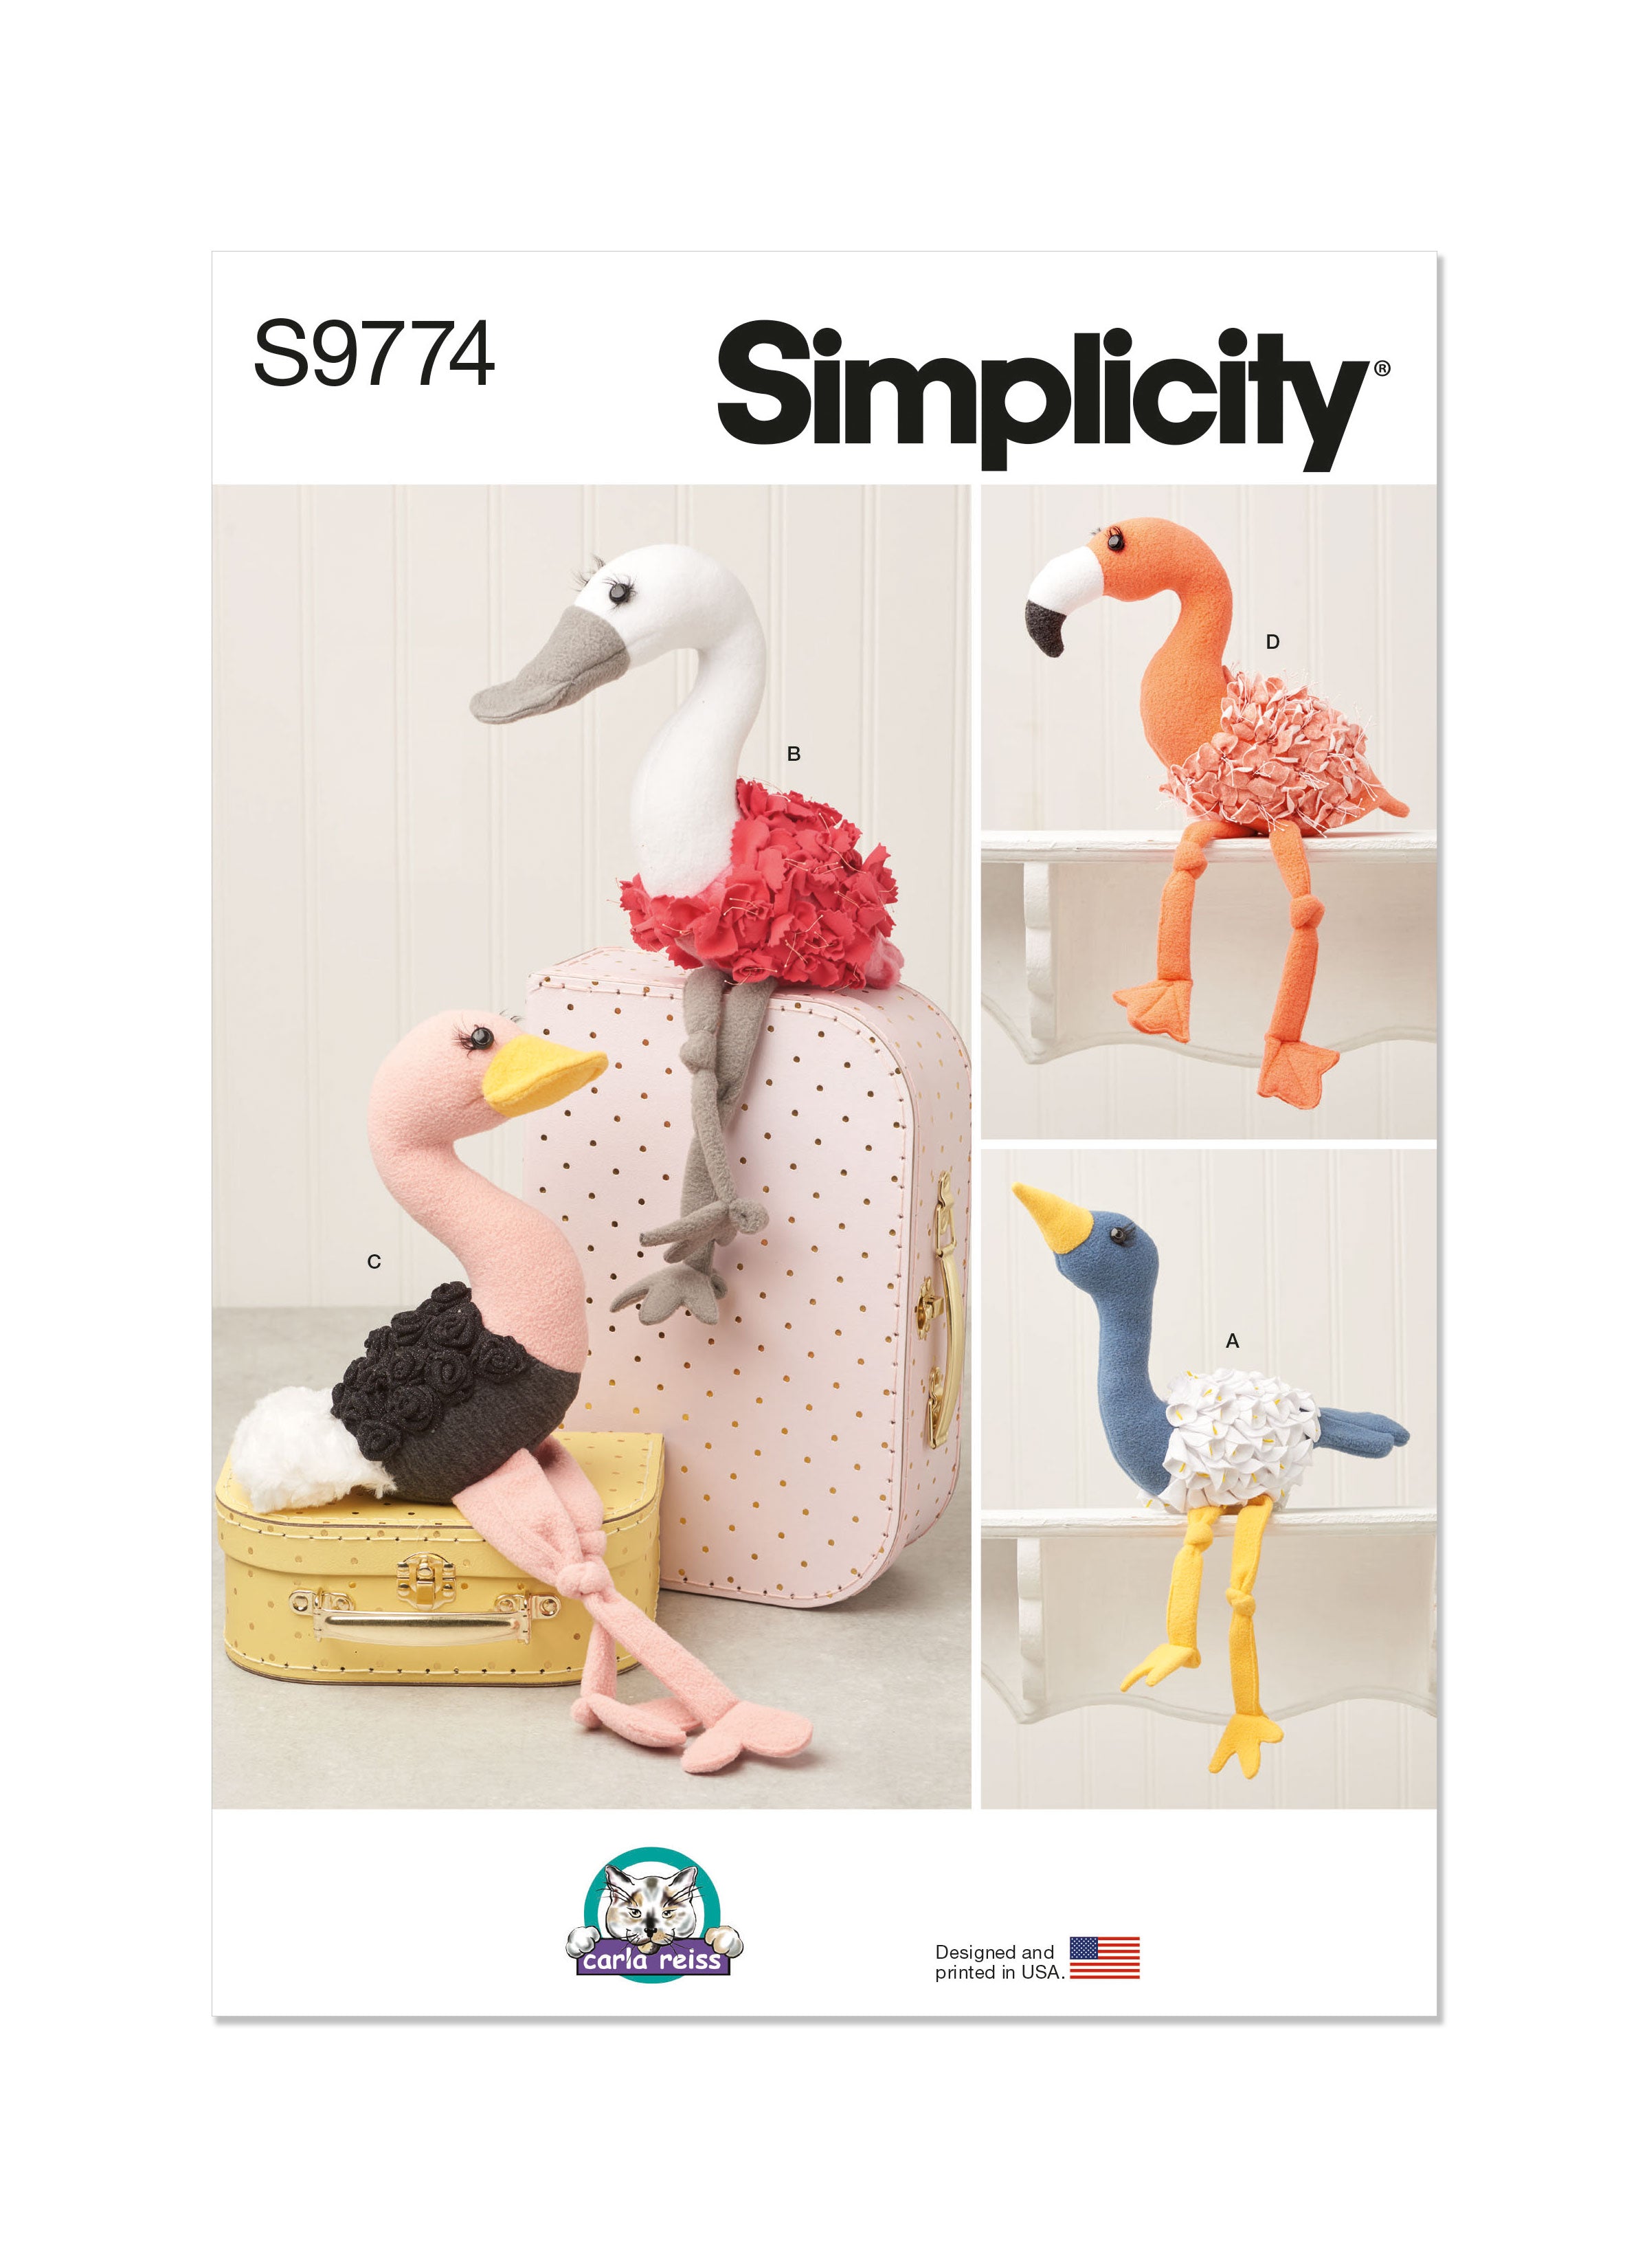 Simplicity 9774 sewing pattern Decorative Plush Birds by Carla Reiss Design from Jaycotts Sewing Supplies